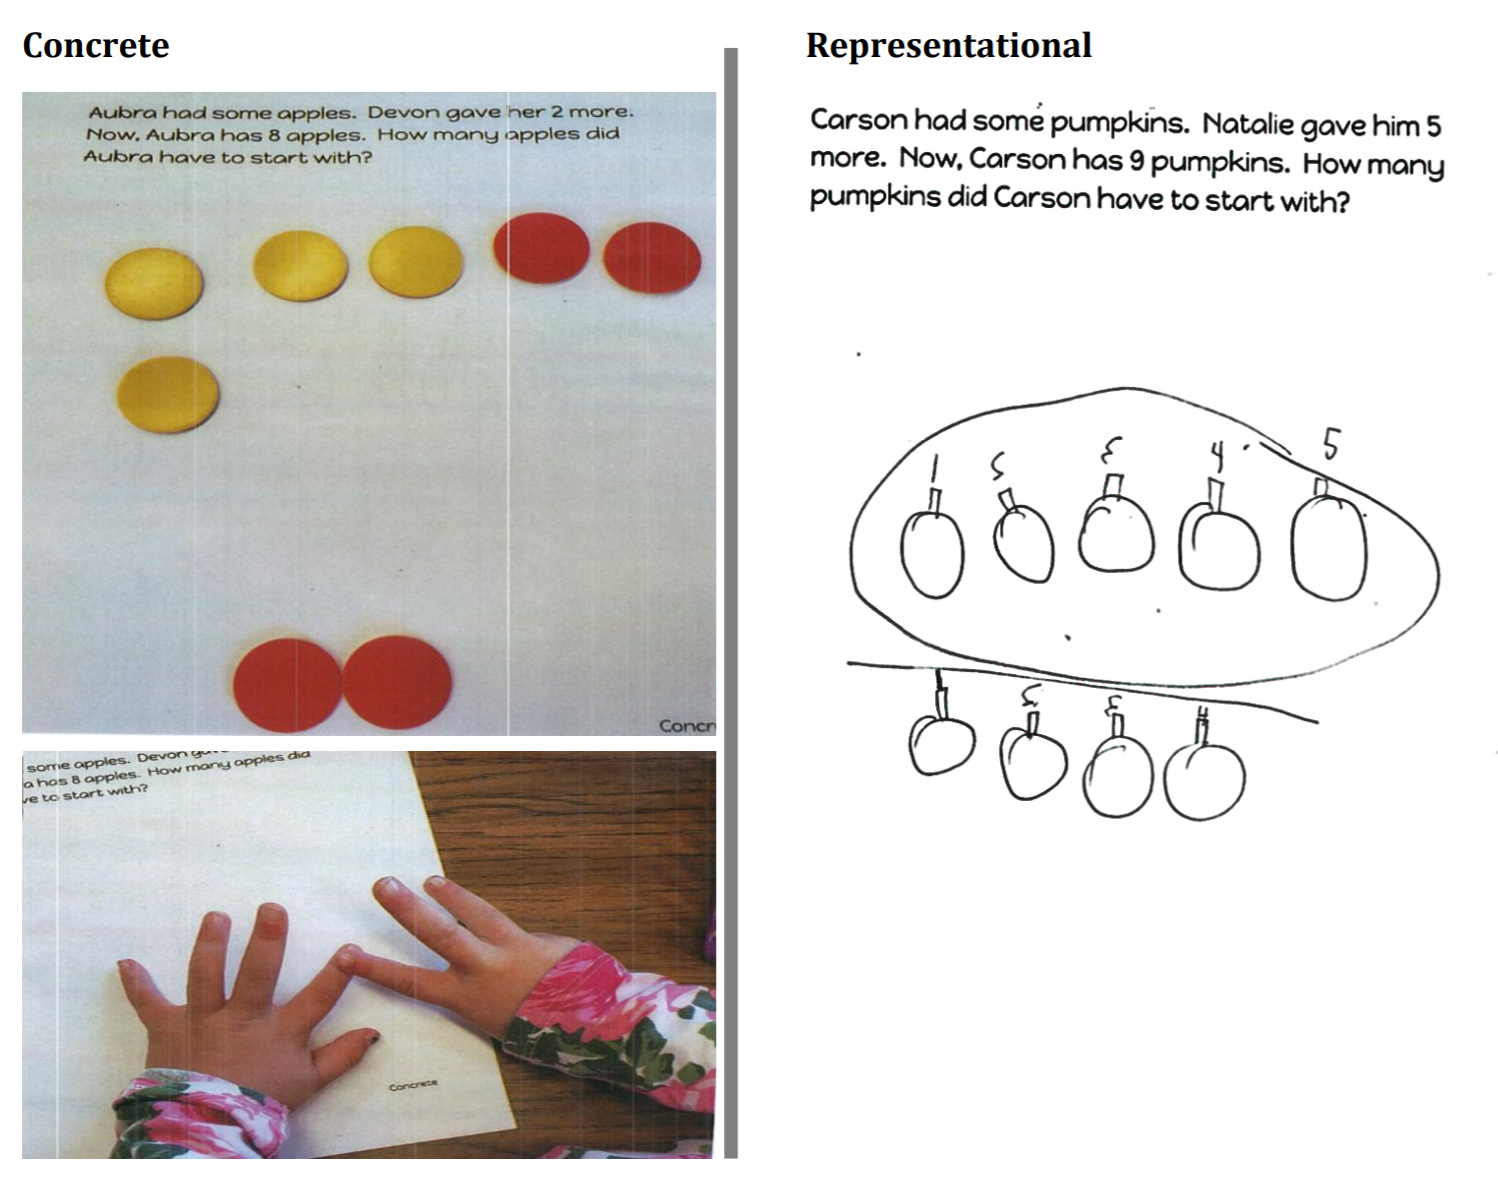 Examples of Concrete and Representational reasoning.